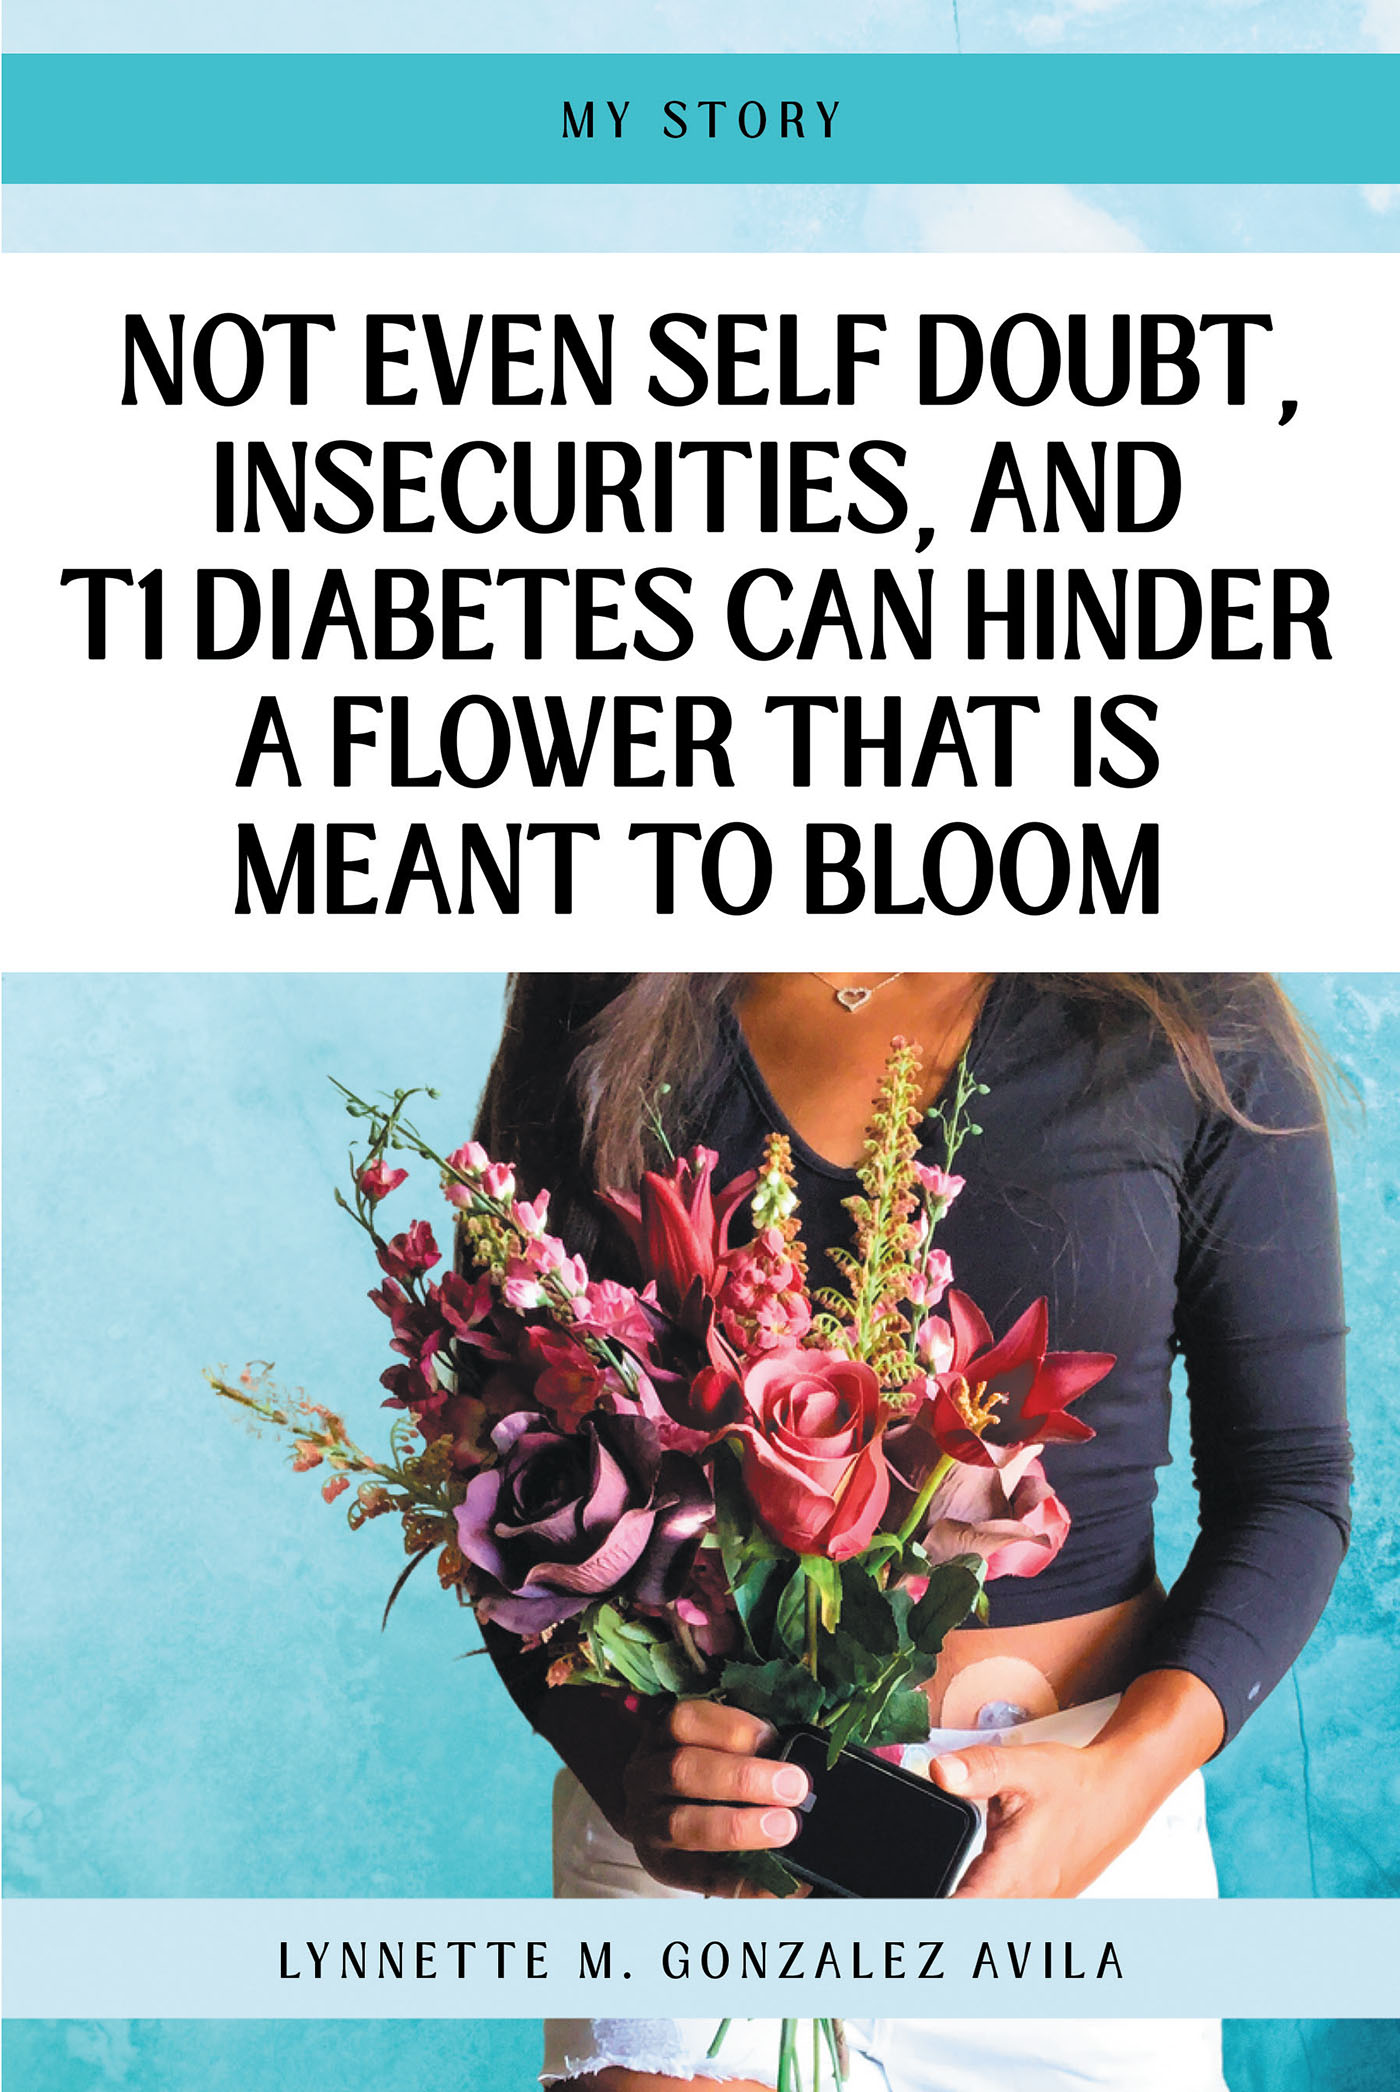 Lynnette M. Gonzalez Avila’s New Book “Not Even Self Doubt, Insecurities, and T1Diabetes Can Hinder a Flower That Is Meant to Bloom” Explores Living with Type 1 Diabetes